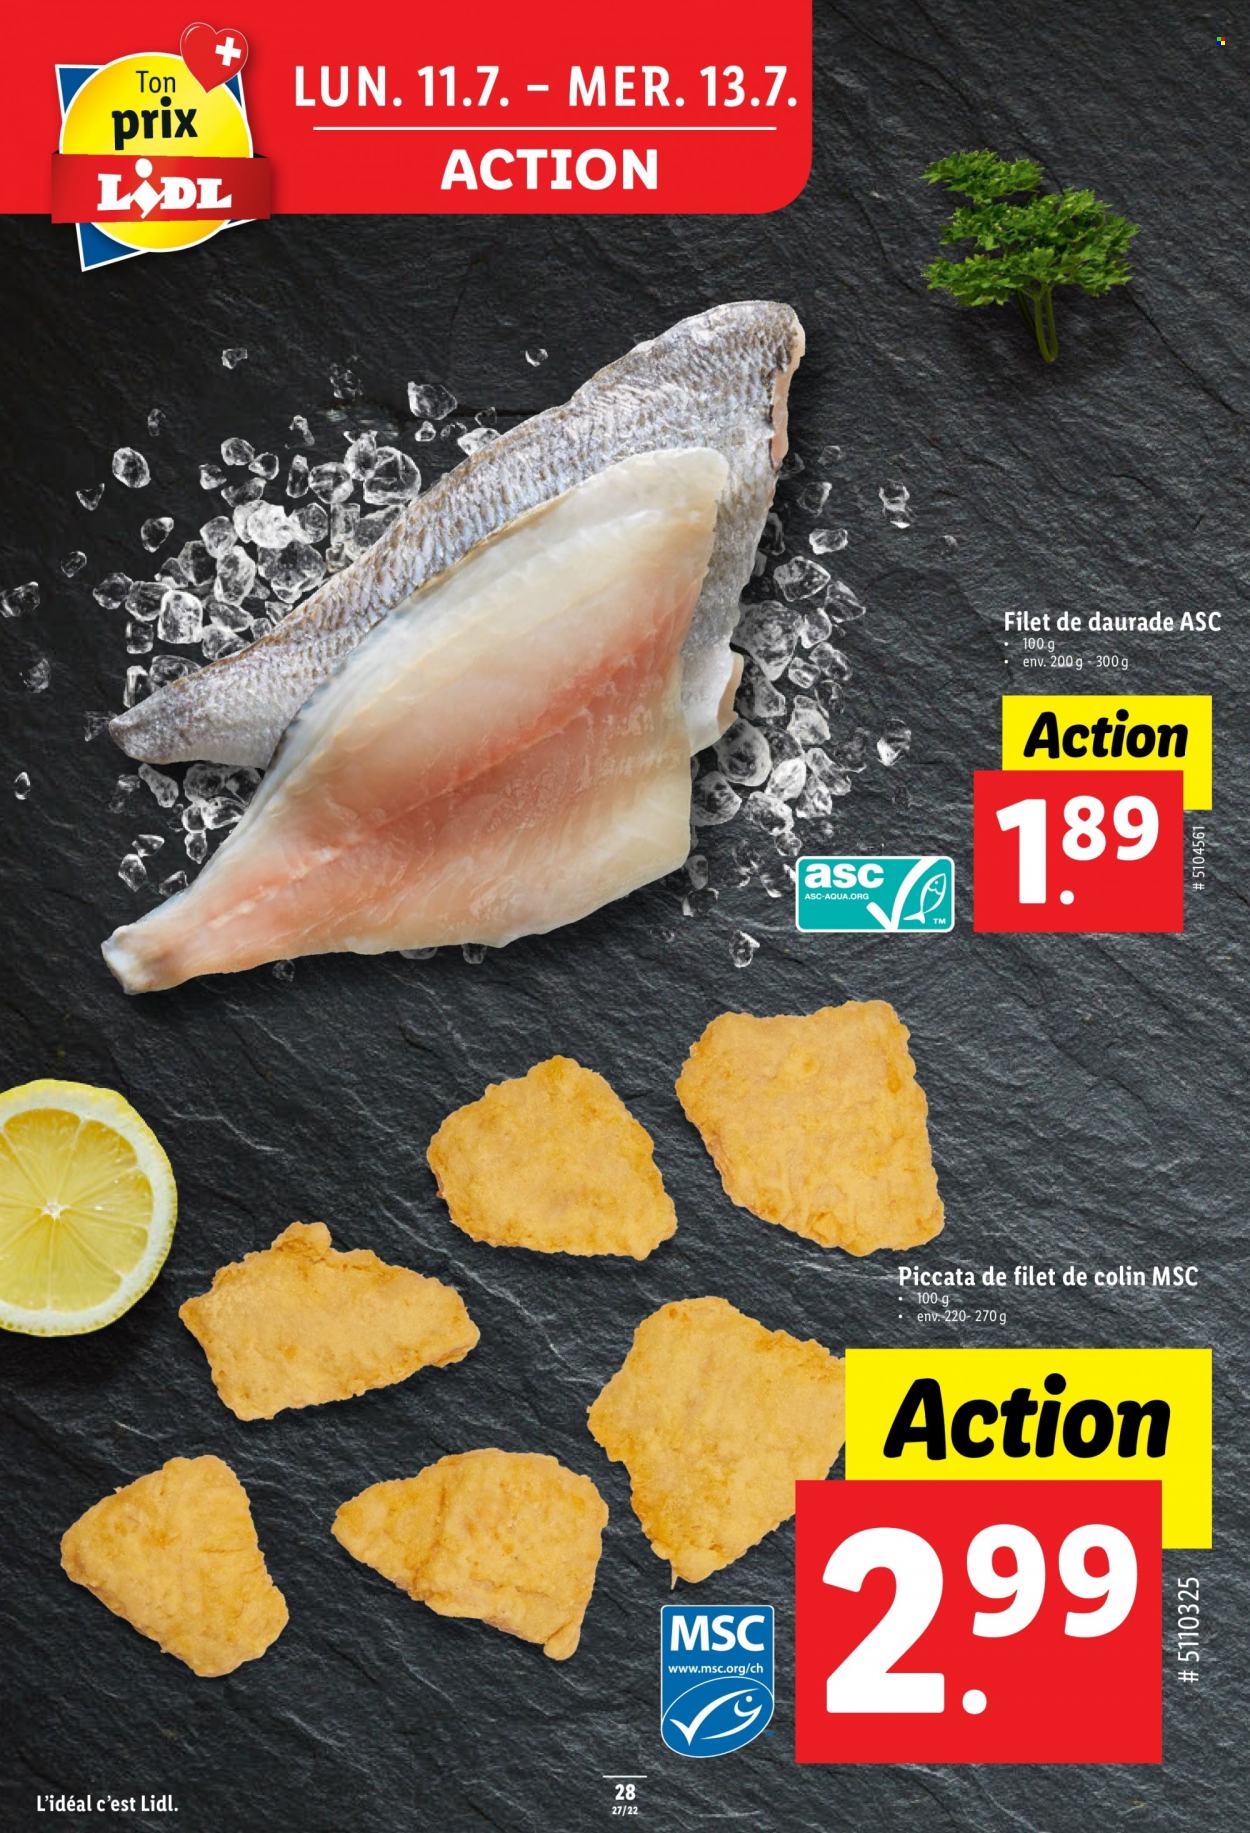 Catalogue Lidl - 7.7.2022 - 13.7.2022. Page 28.